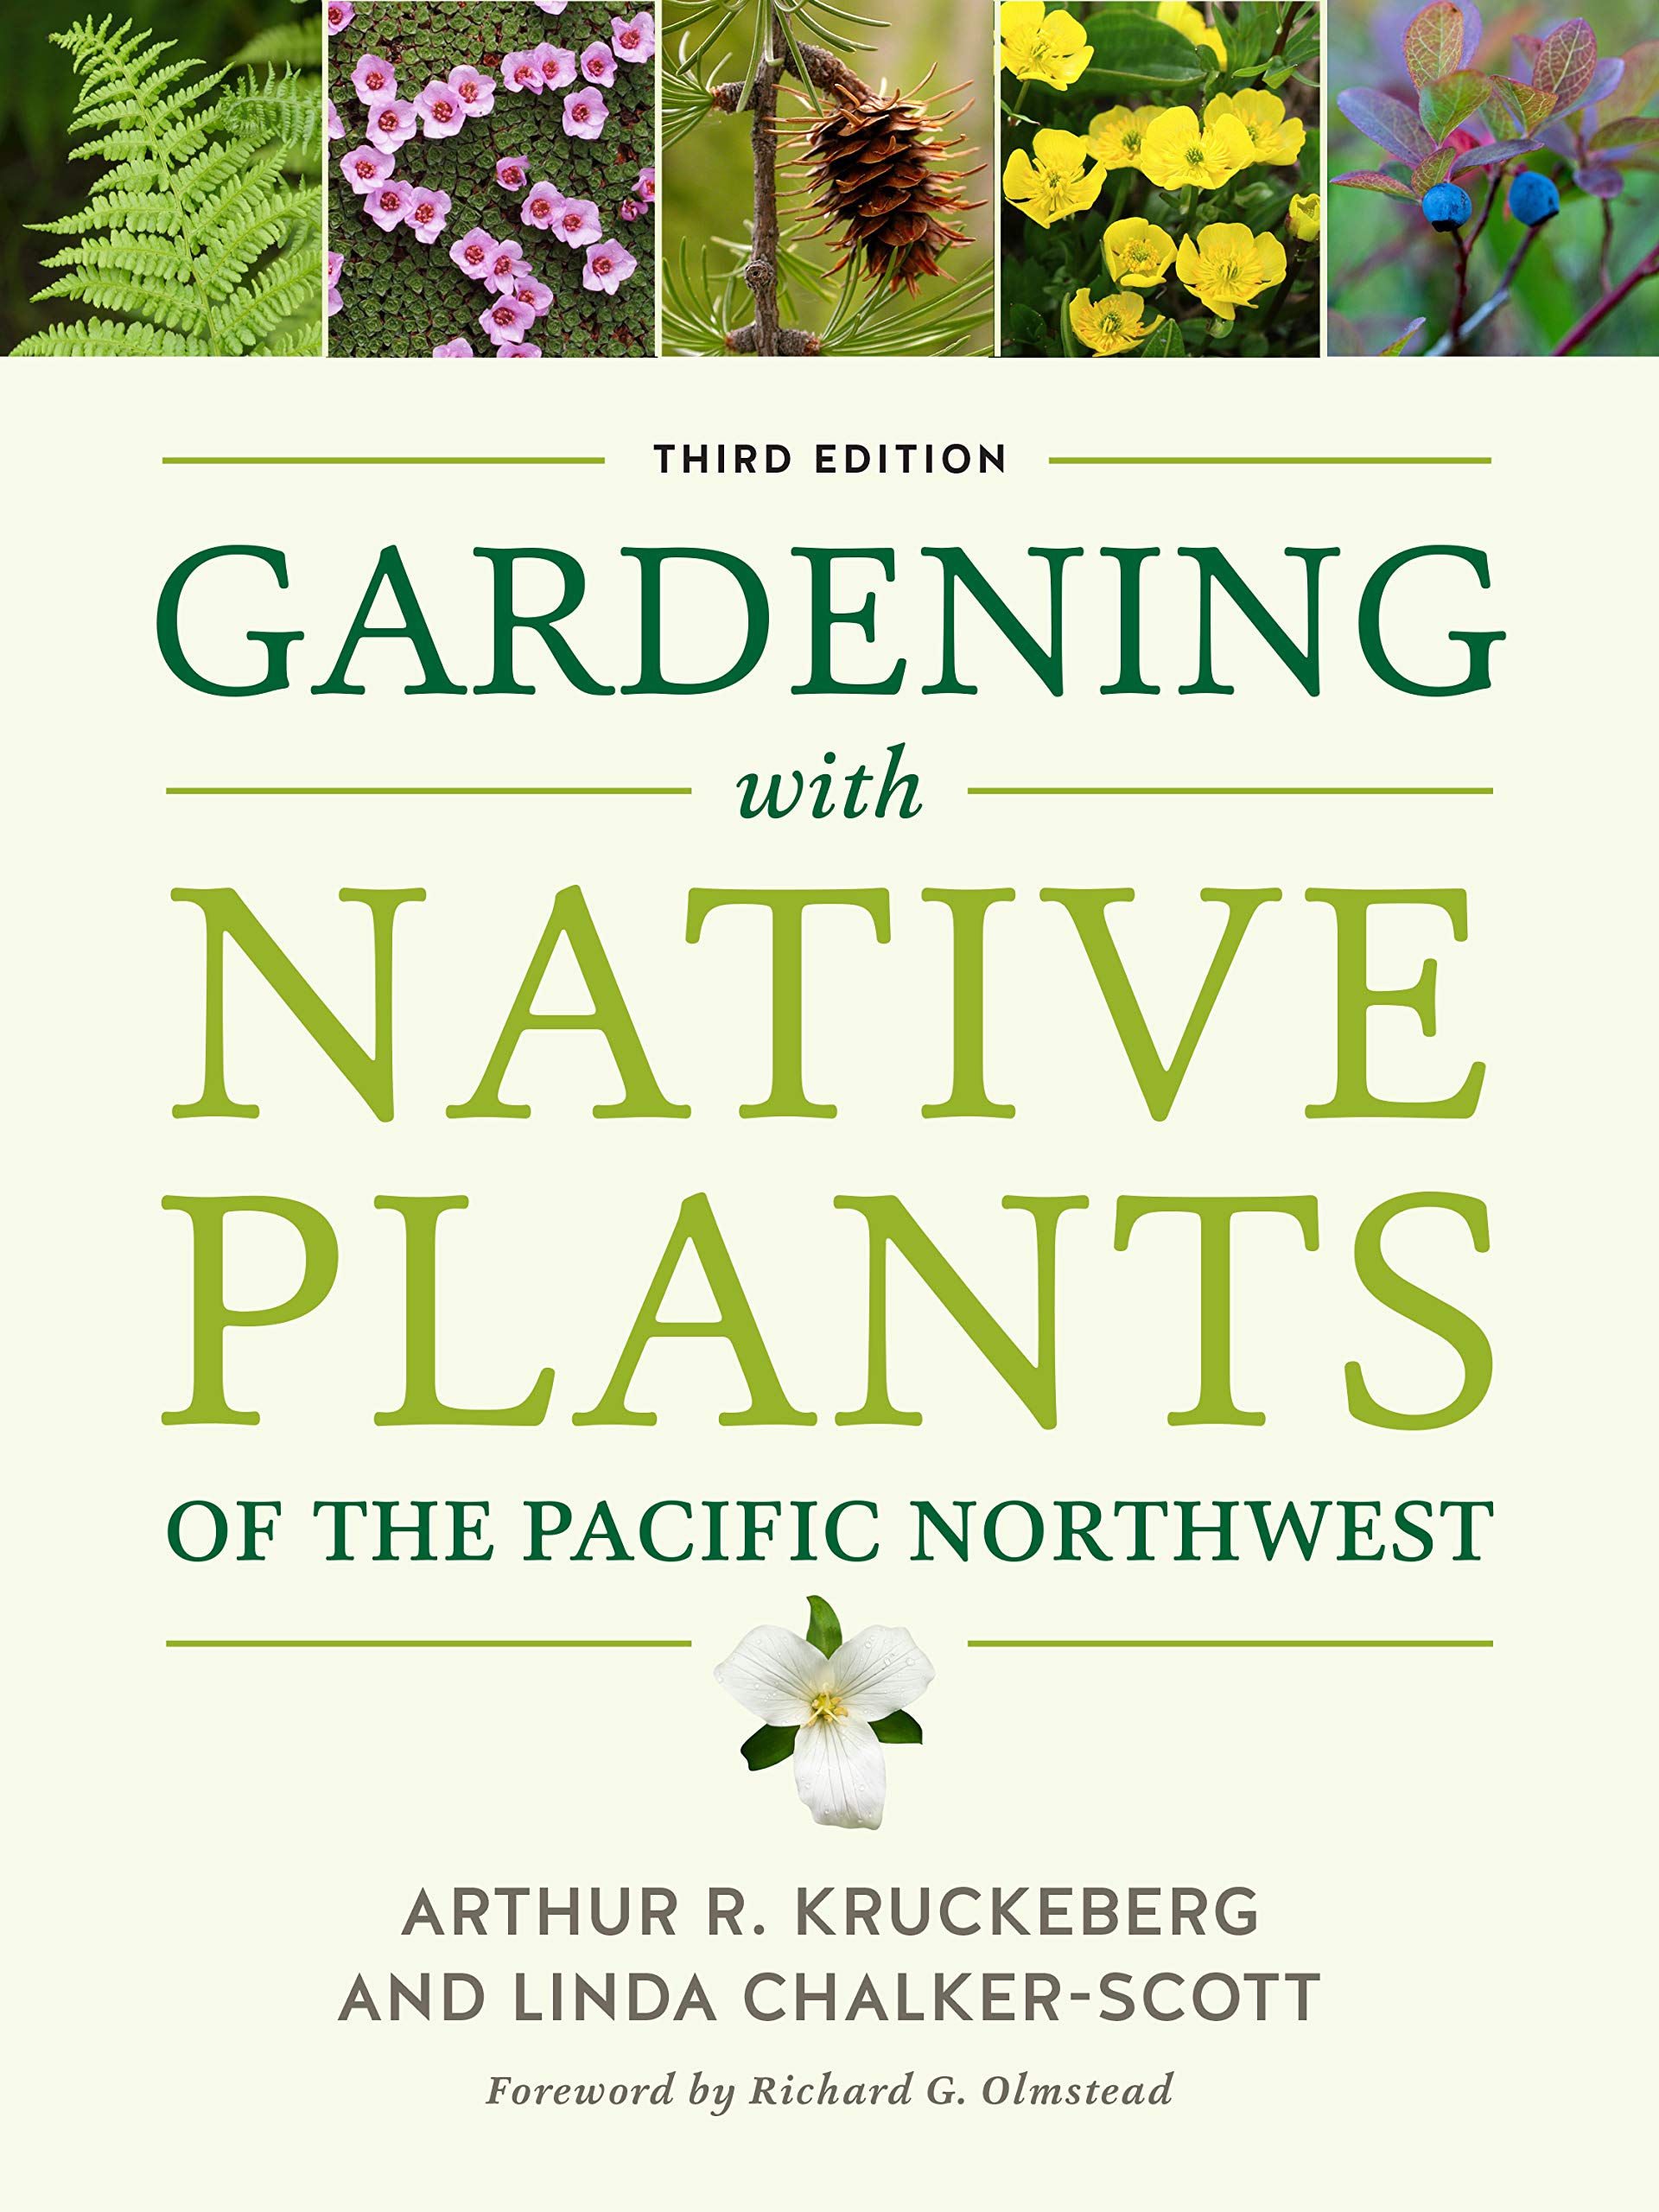 Gardening with Native Plants of the PNW